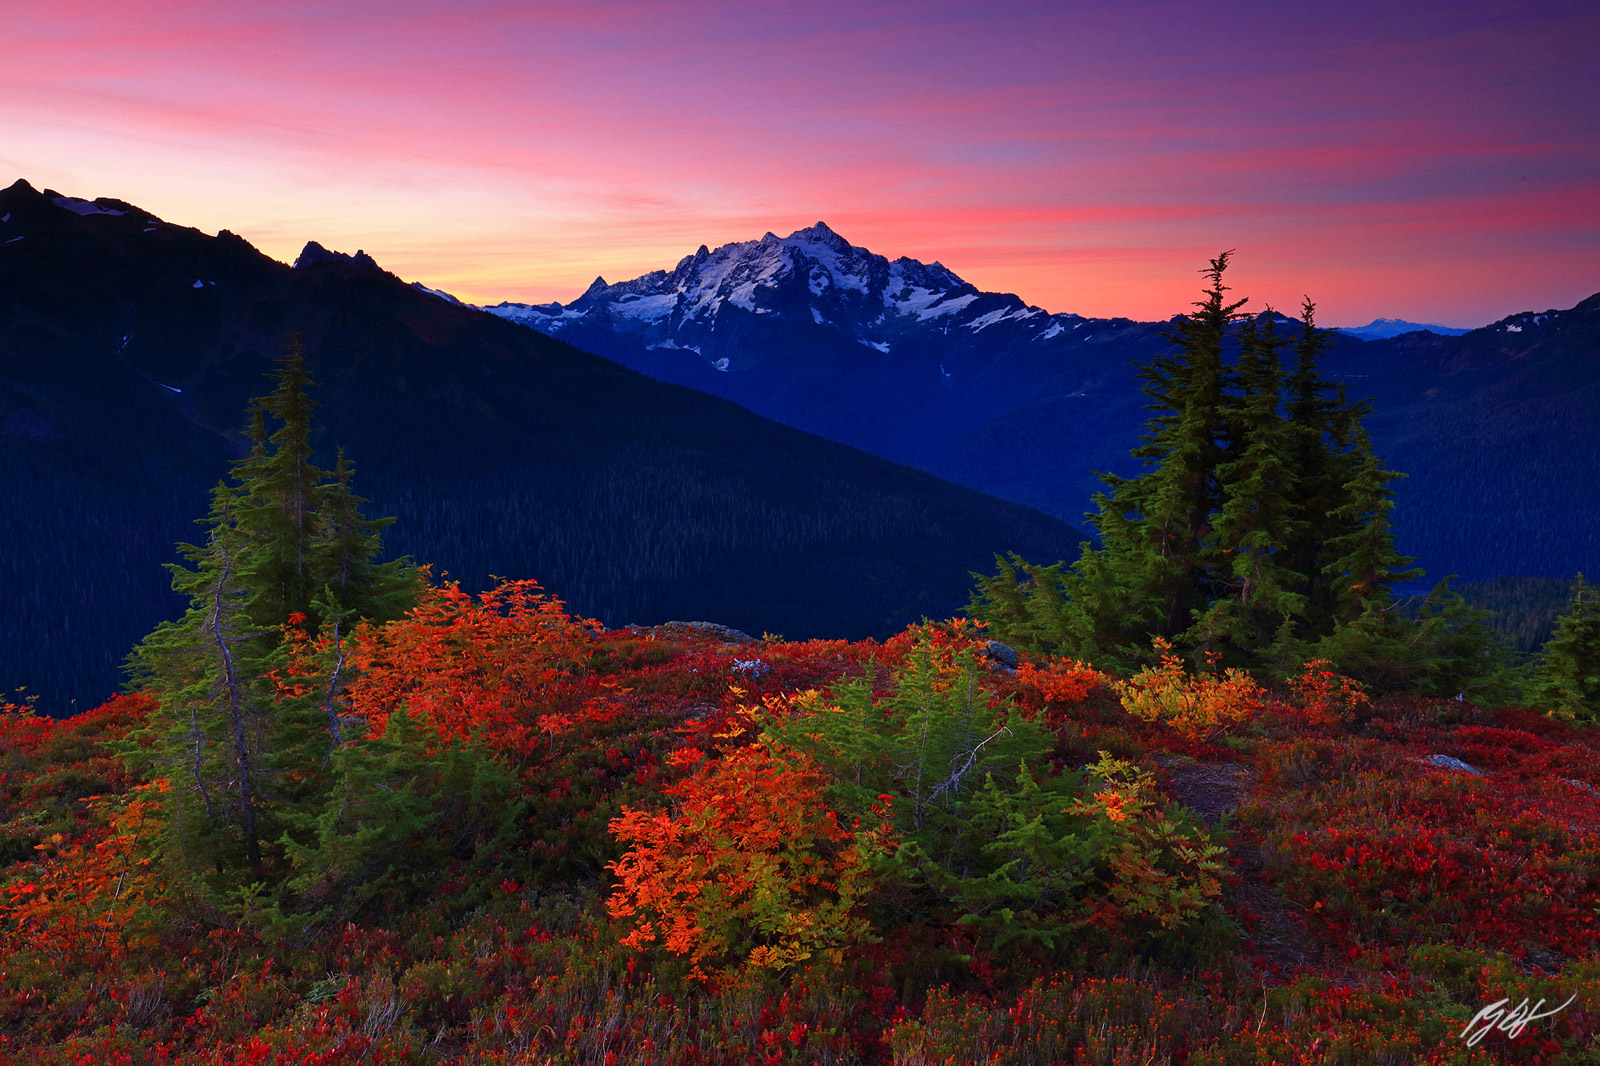 Sunrise Mt Shuksan from Yellow Aster Butte in the Mt Baker Wilderness in Washington